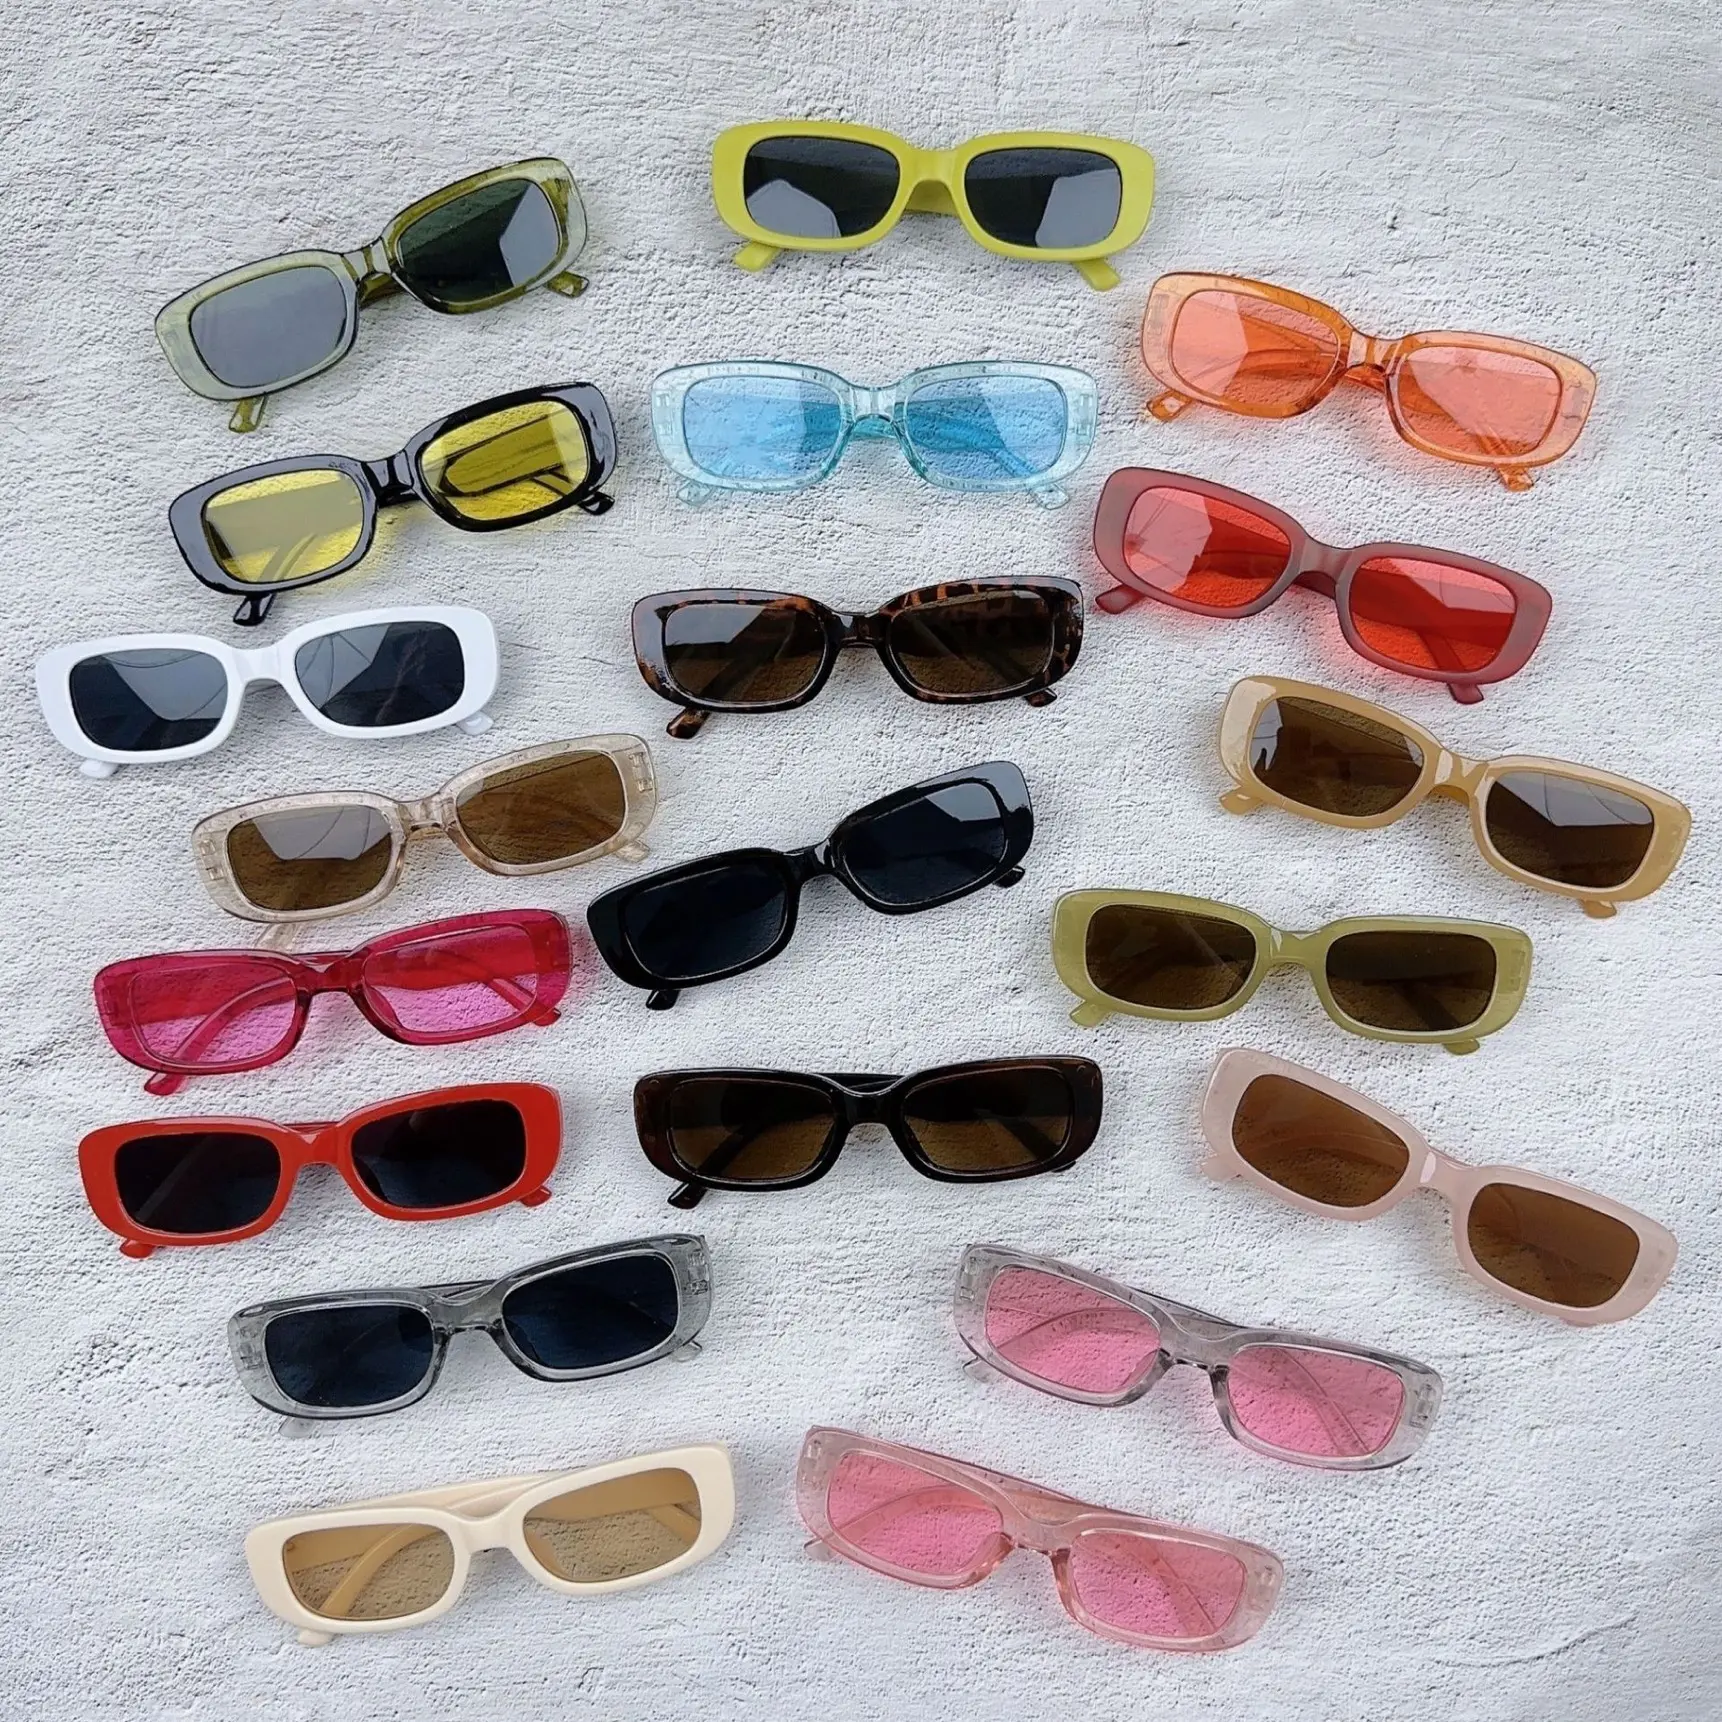 Wholesale New Candy-colored Sunglasses Small Frame Sunglasses Fashion Vintage Trend Men Women